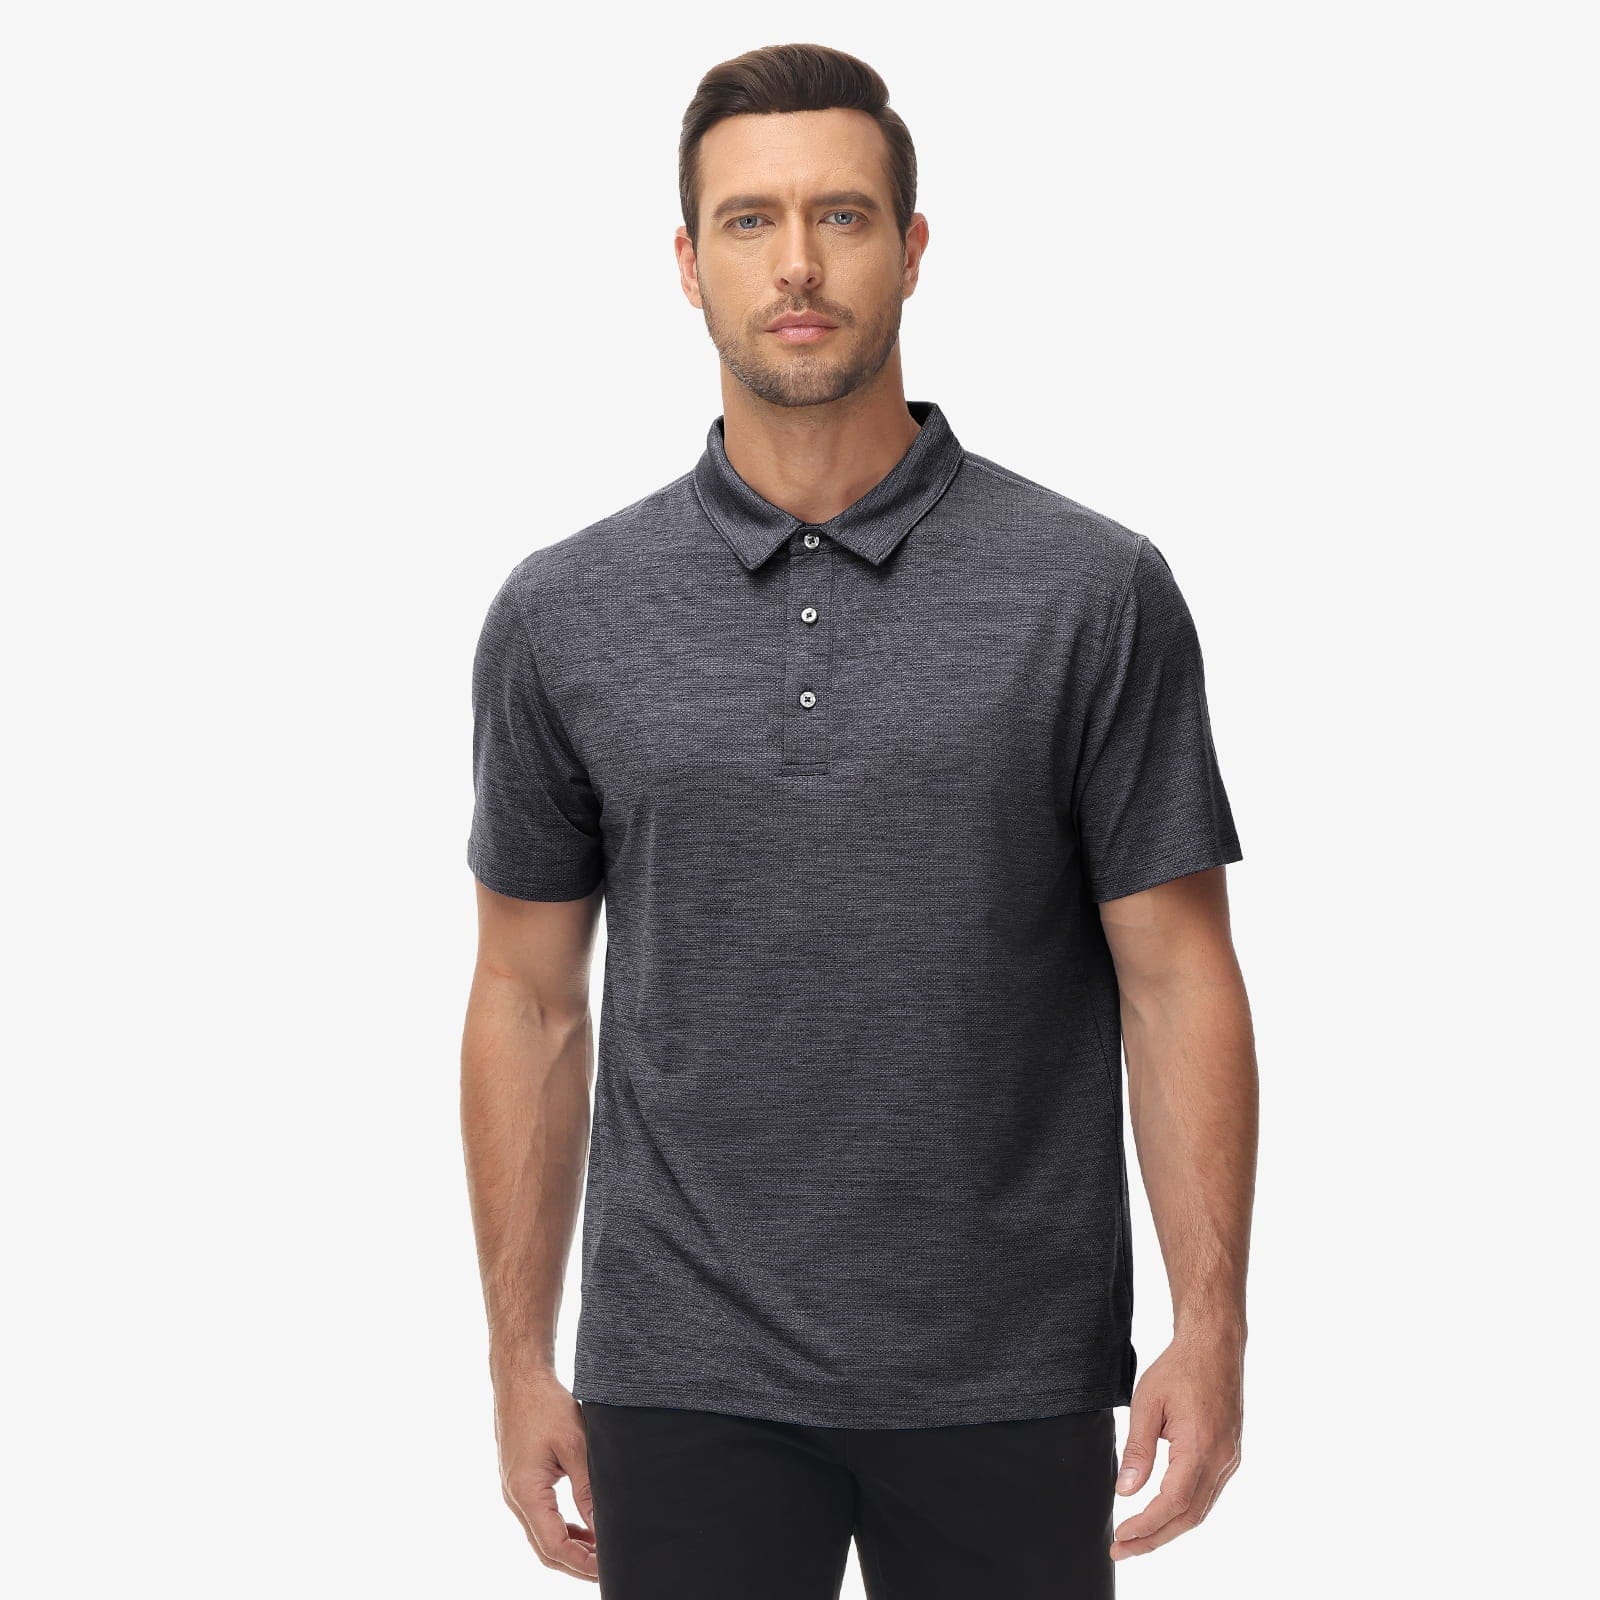 Men's Golf Dry Fit Polo Shirts Athletic Collared Shirt Men Polo MIER